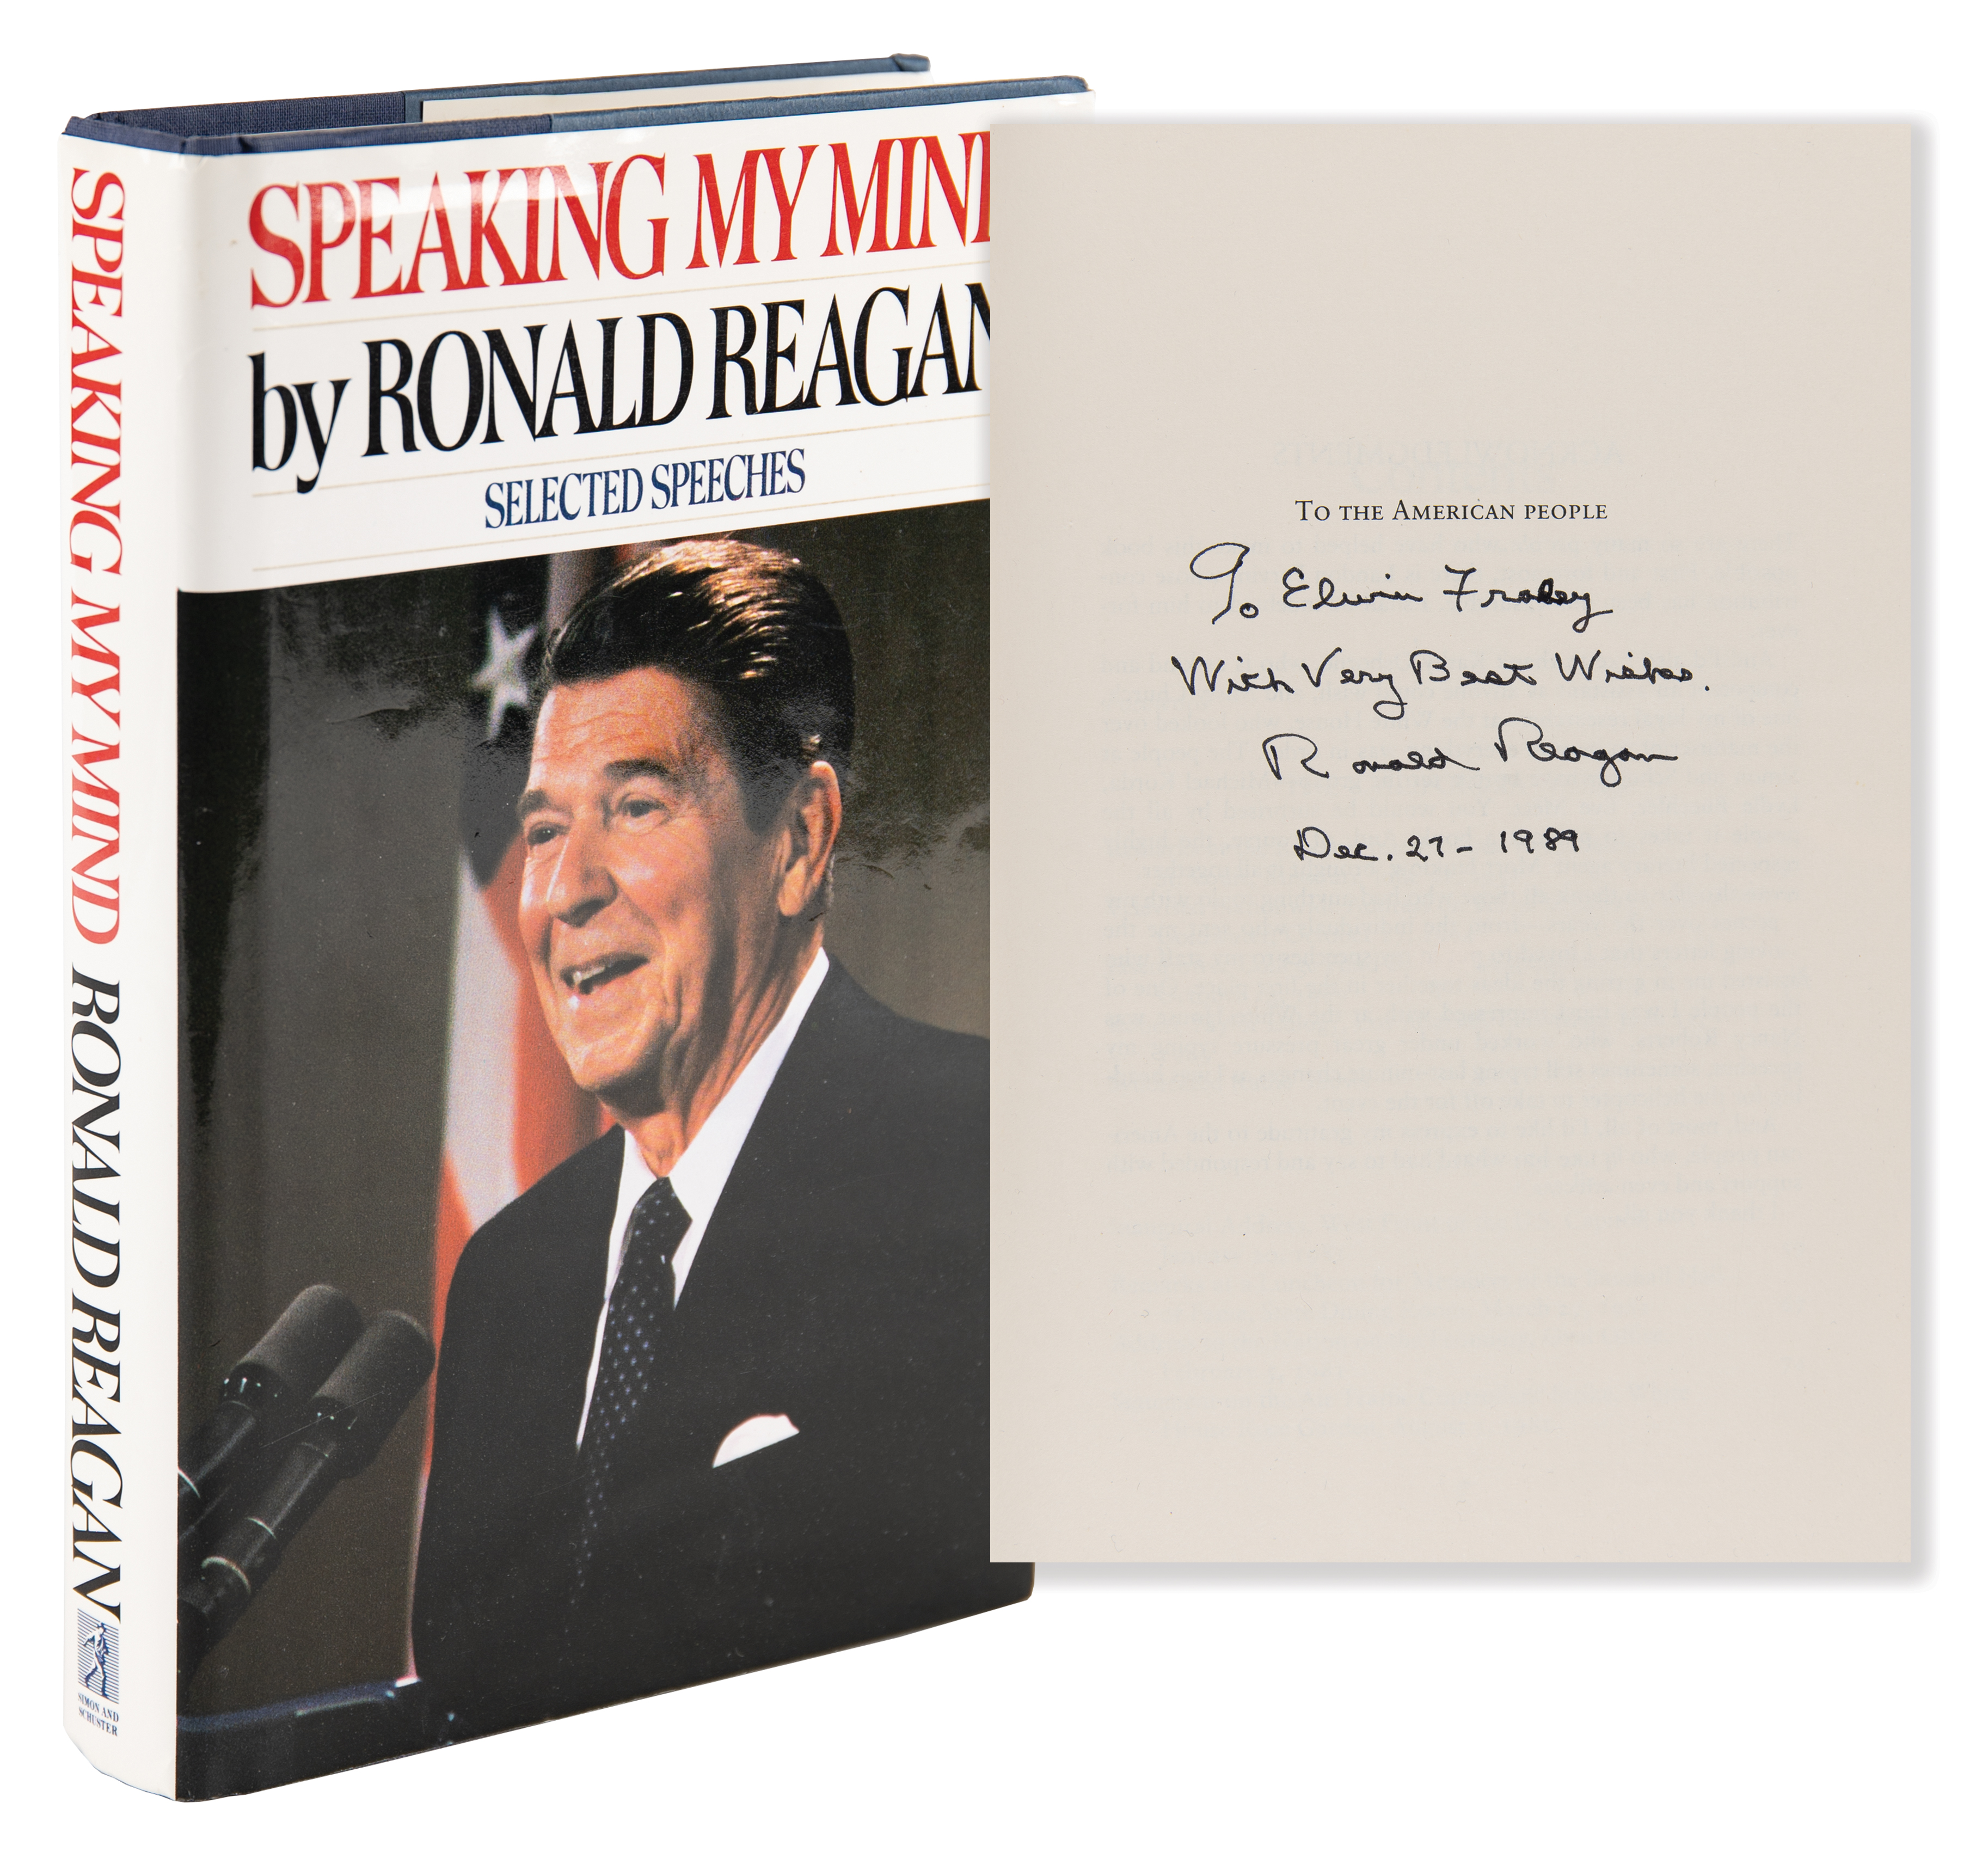 Lot #105 Ronald Reagan Signed Book - Speaking My Mind - Image 1